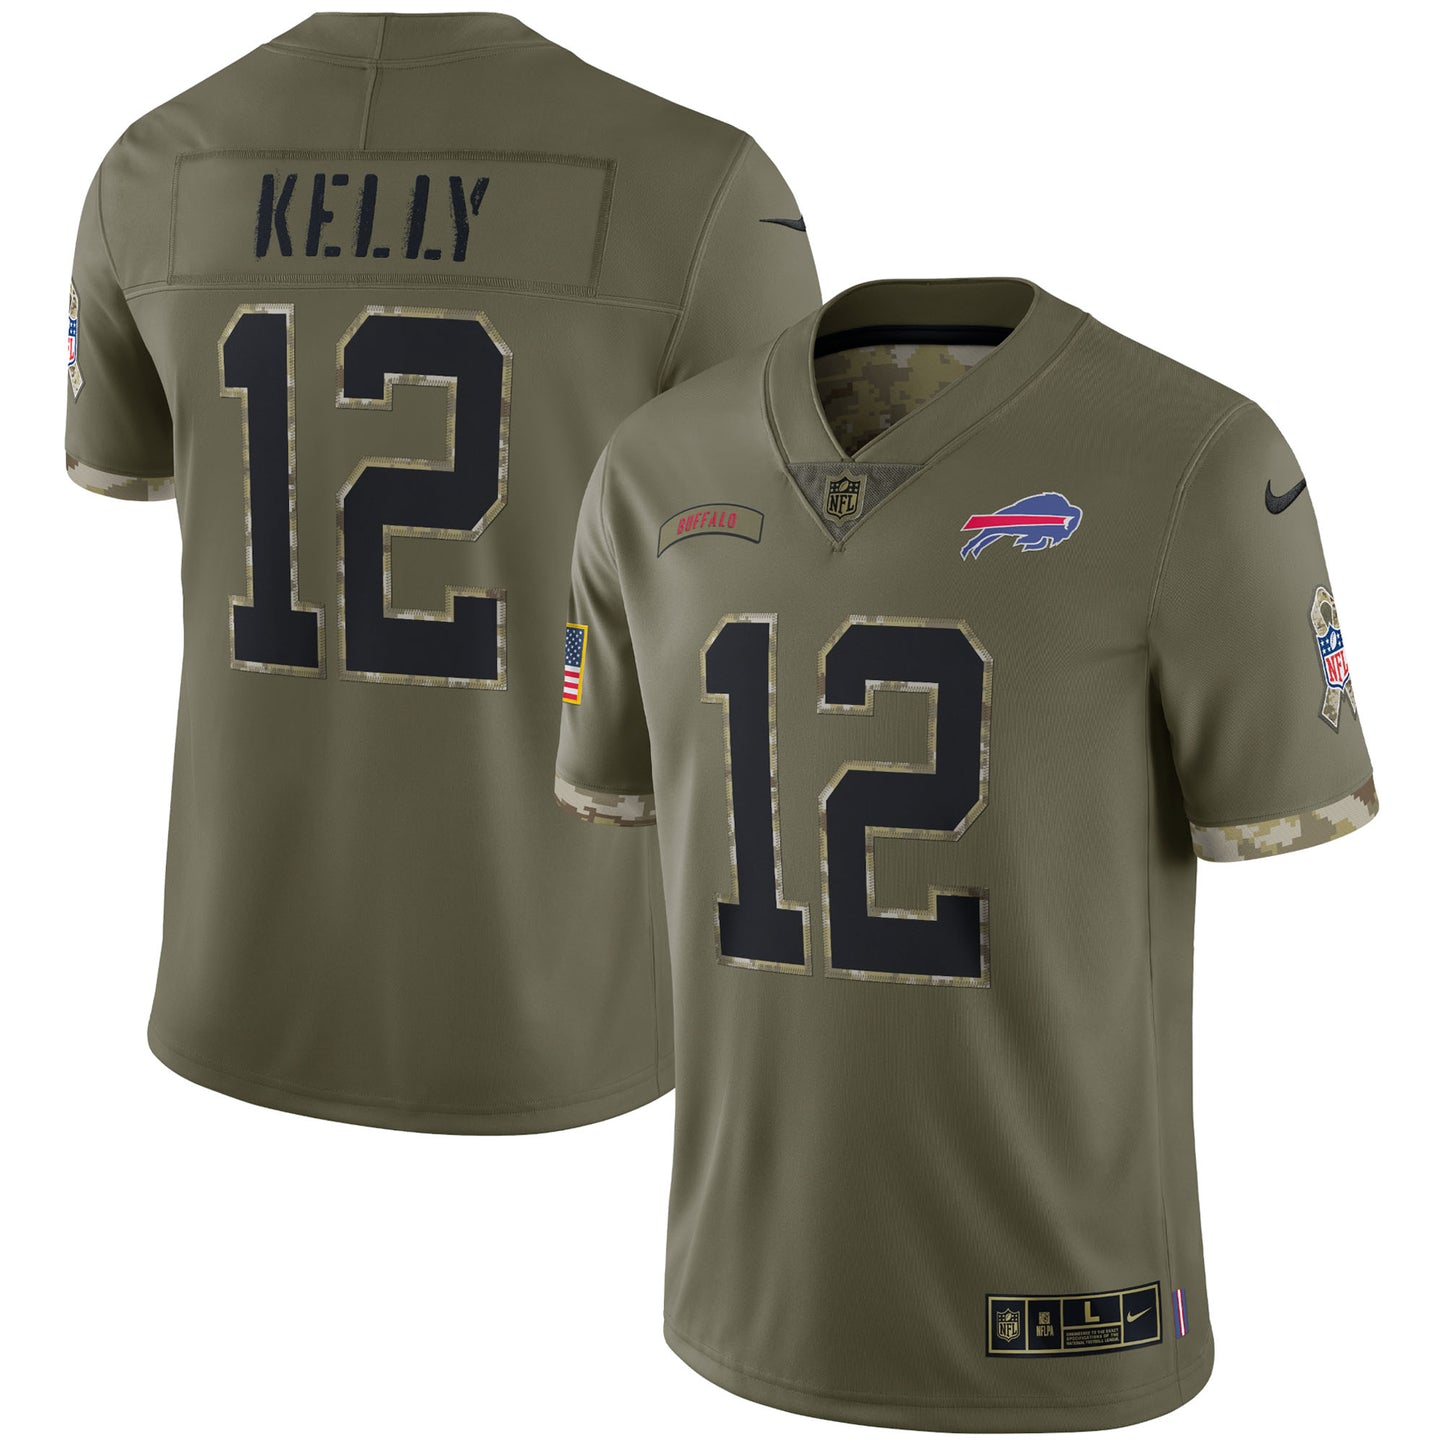 Jim Kelly Buffalo Bills 2022 Salute To Service Retired Player Limited Jersey - Olive